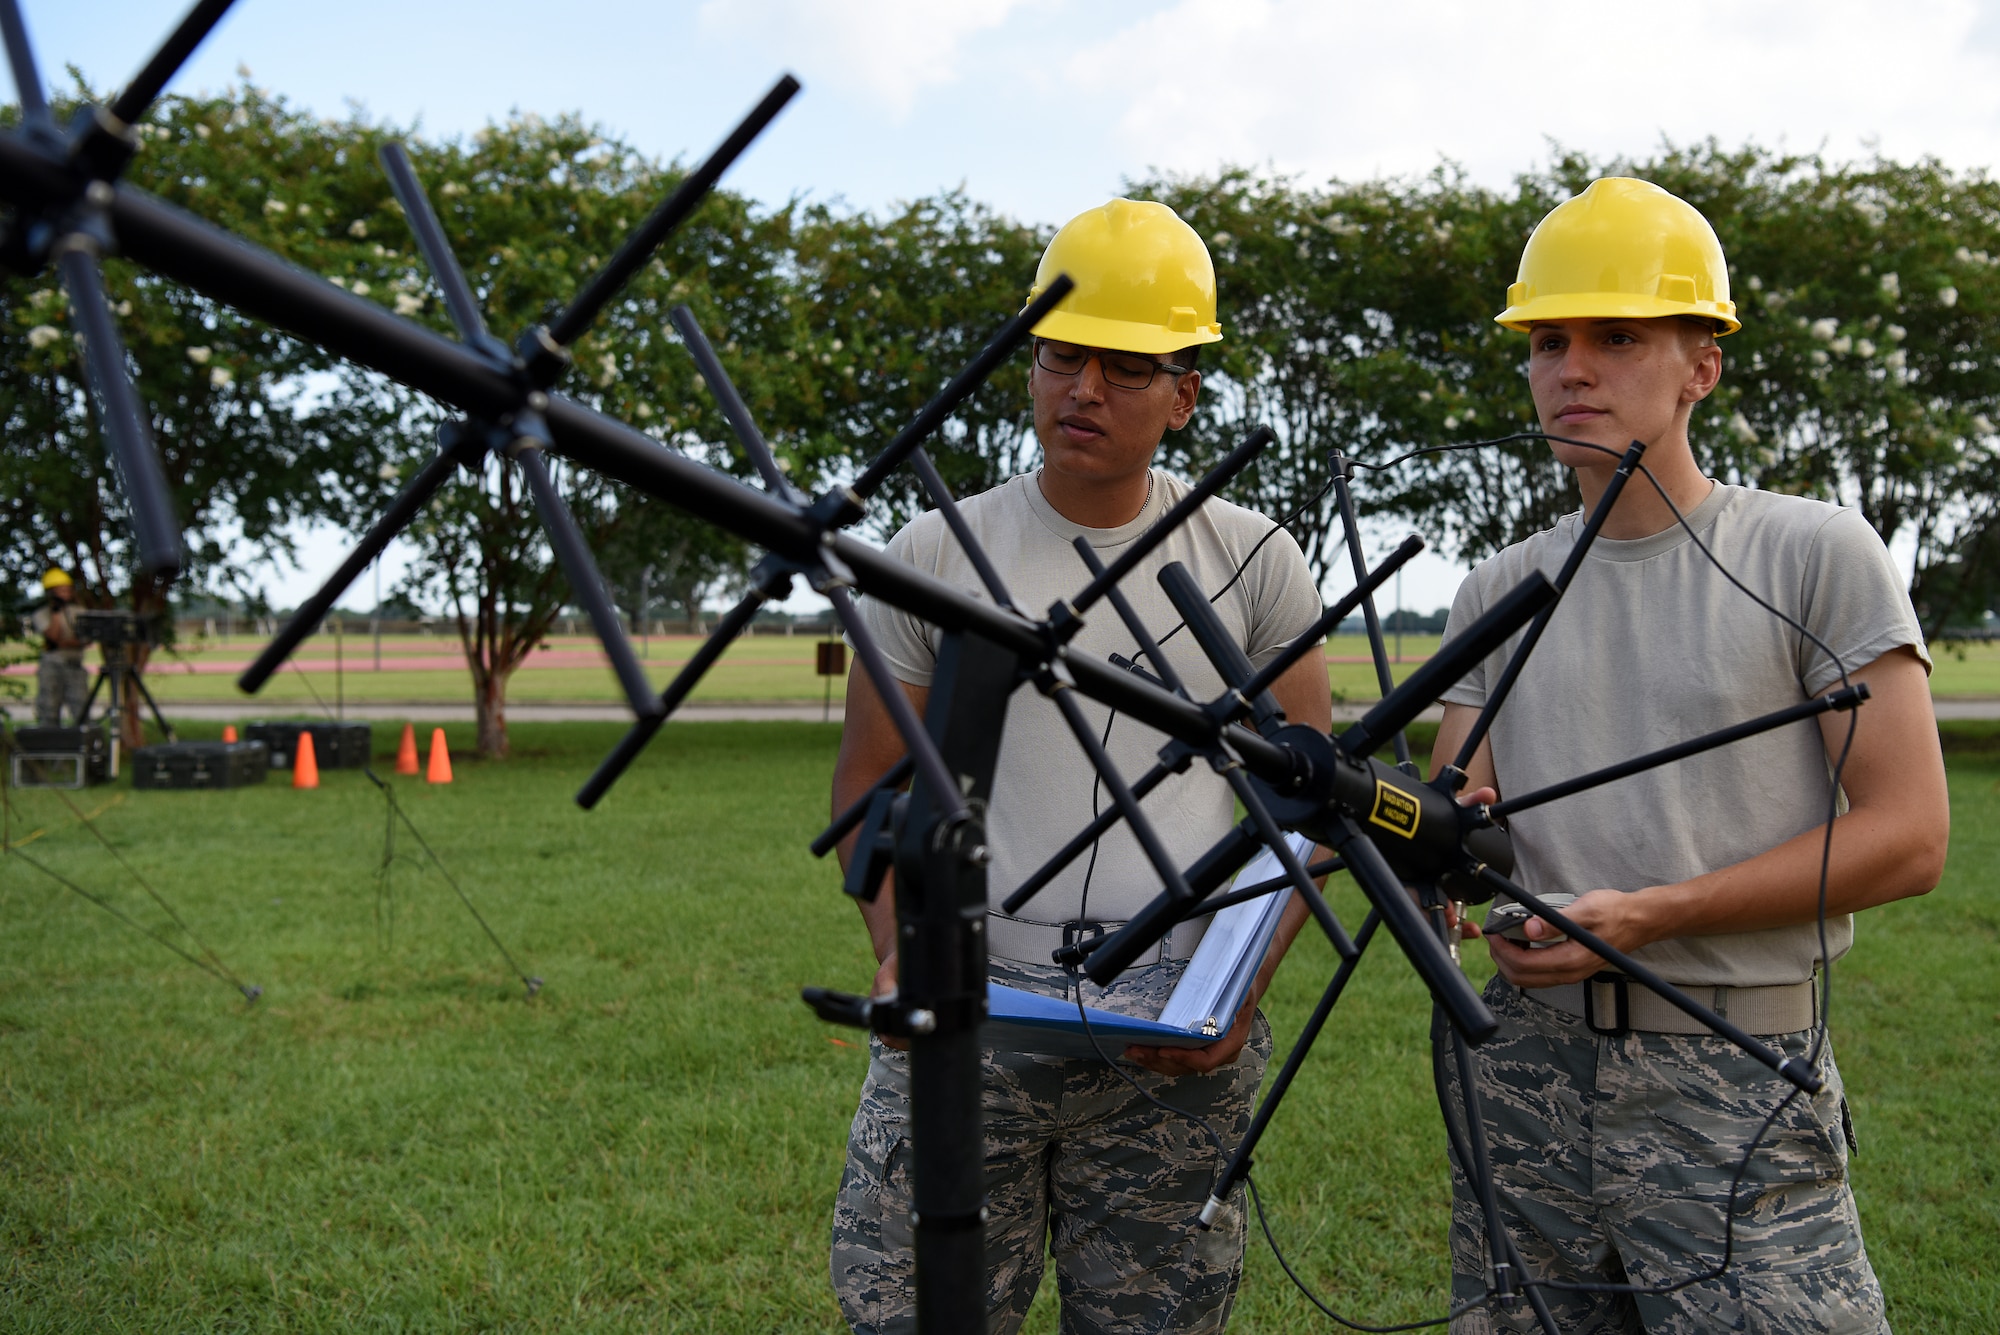 U.S. Air Force Airmen Noah Ruiz and Dante Wolfinger, 338th Training Squadron Radio Frequency Transmission Systems students, set up tactical satellite communication outside of Jones Hall on Keesler Air Force Base, Mississippi, August 12, 2019. The RF Transmission System course is a 653 hour course where students learn line-of-sight communication, high frequency operations, satellite communications and systems and more. (U.S. Air Force photo by Senior Airman Suzie Plotnikov)